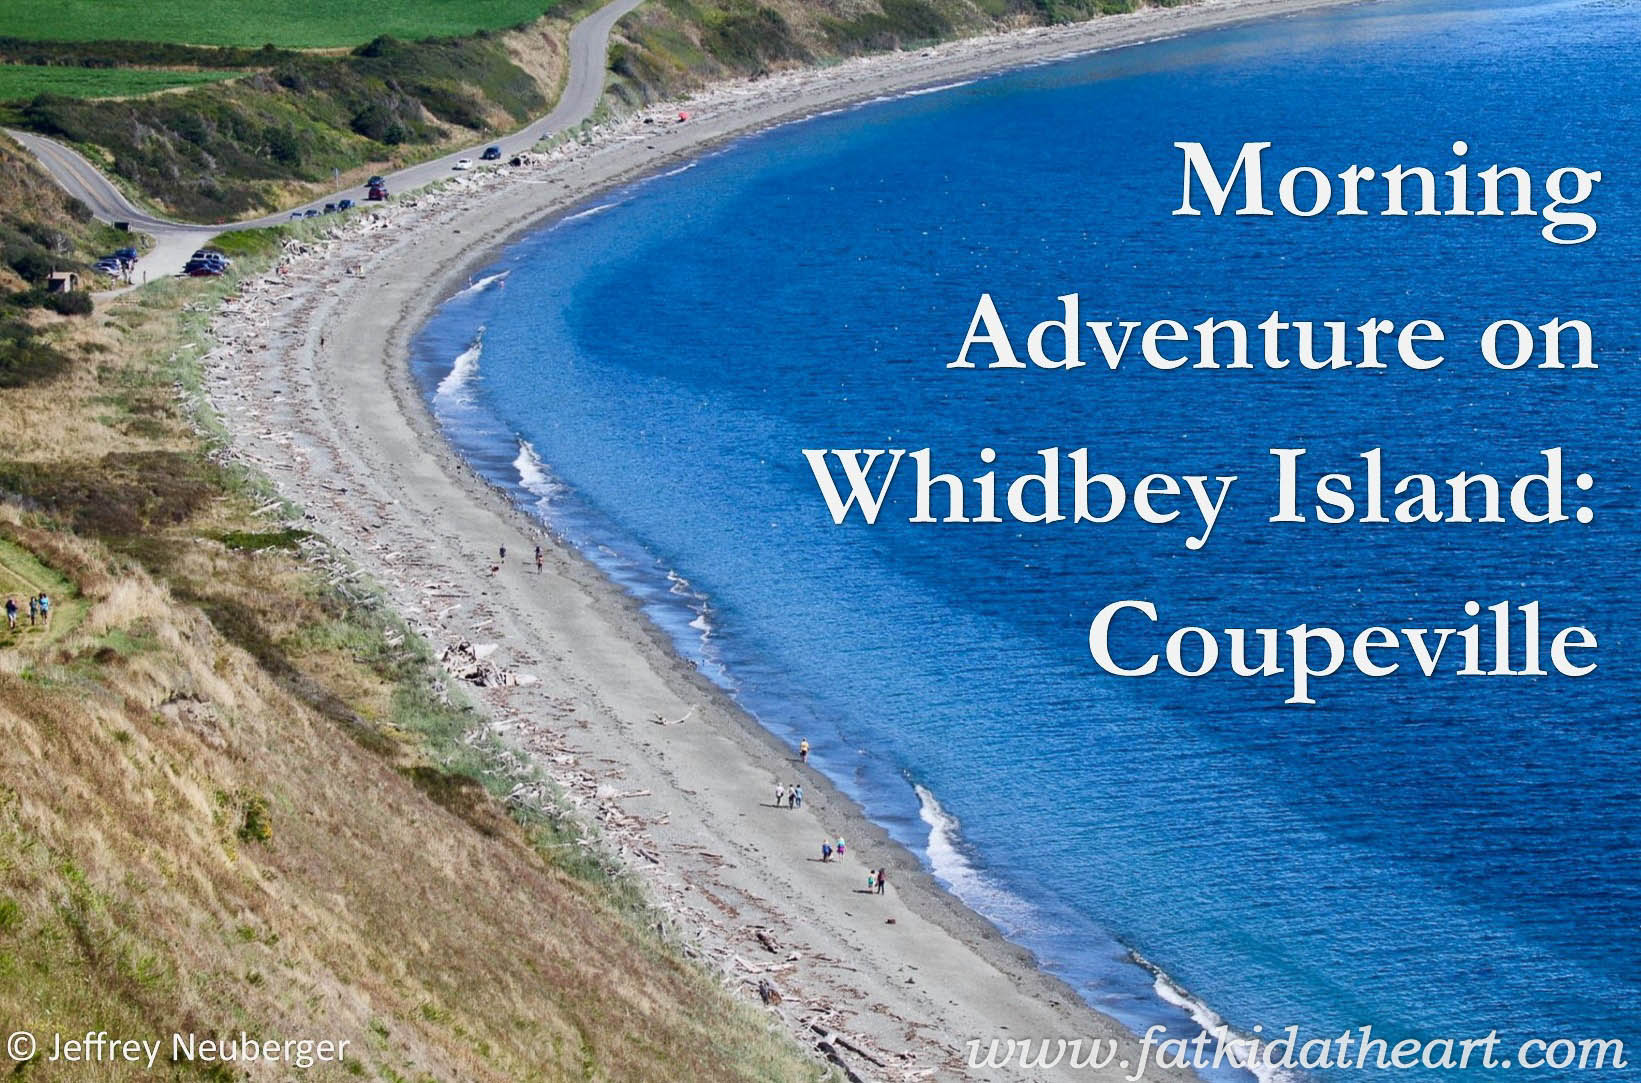 Morning Adventure on Whidbey Island: Coupeville